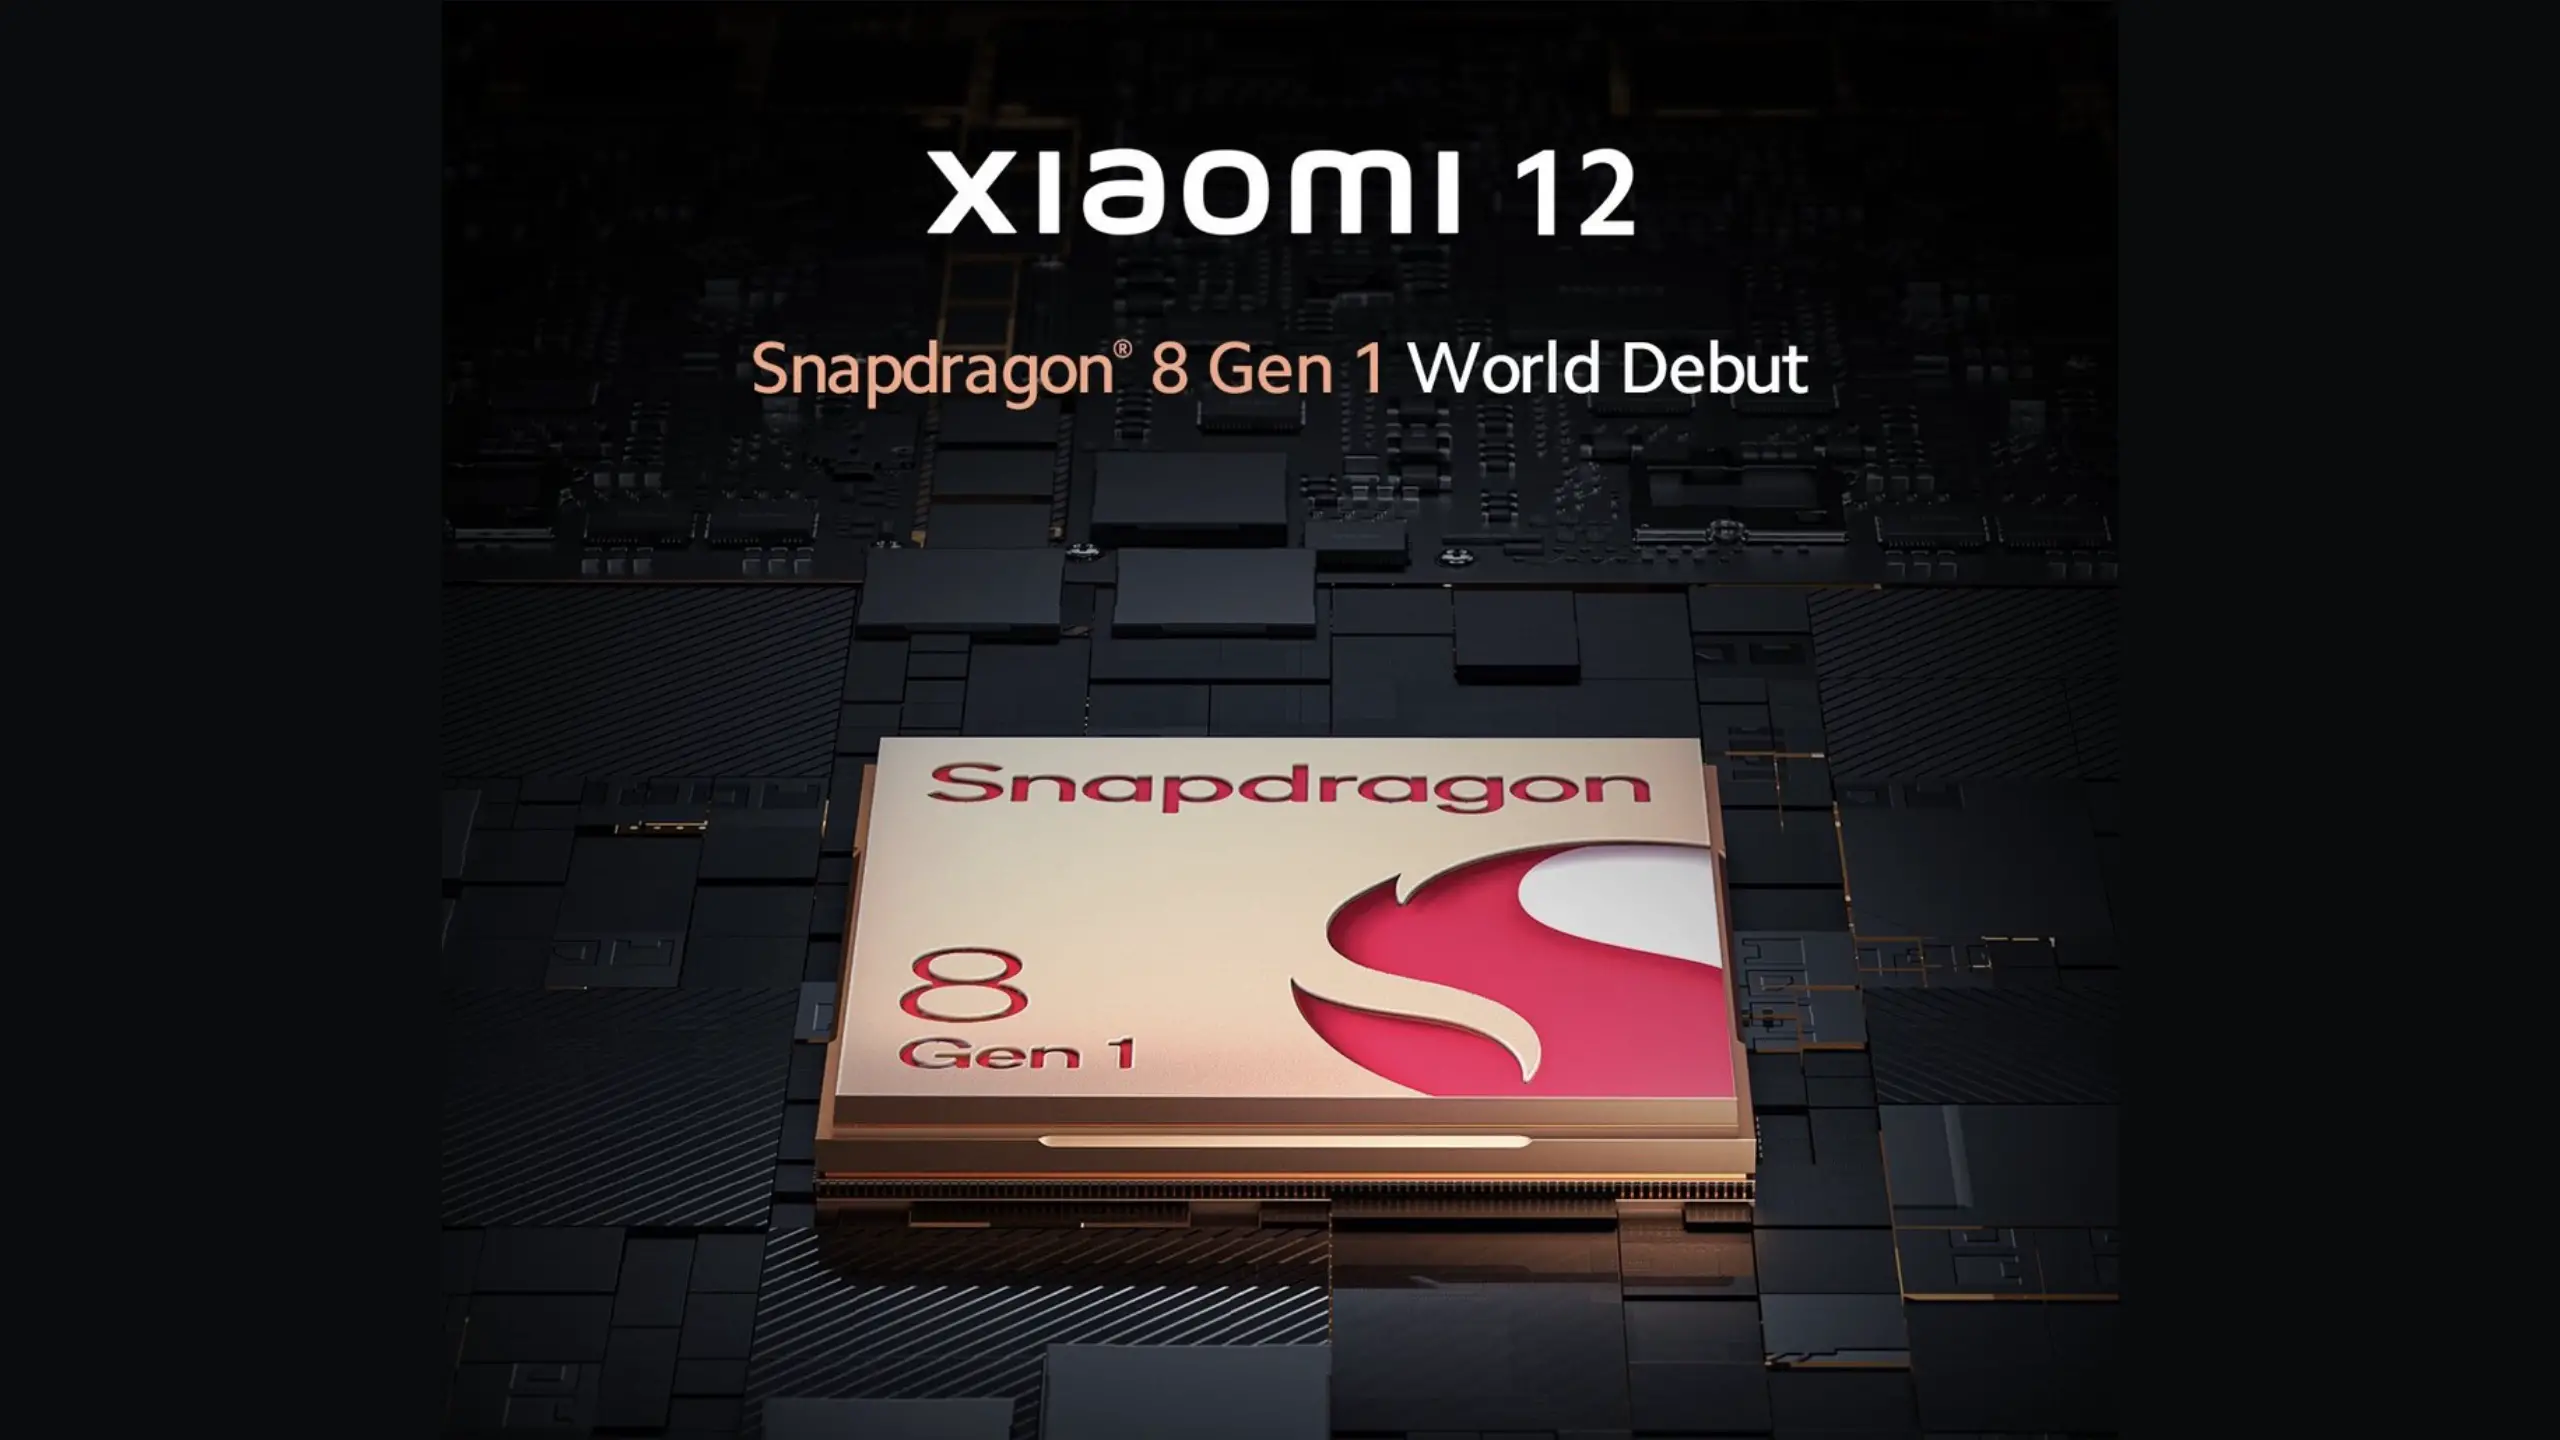 Xiaomi 12 will be the first smartphone to utilize Qualcomm's most recent leader chip